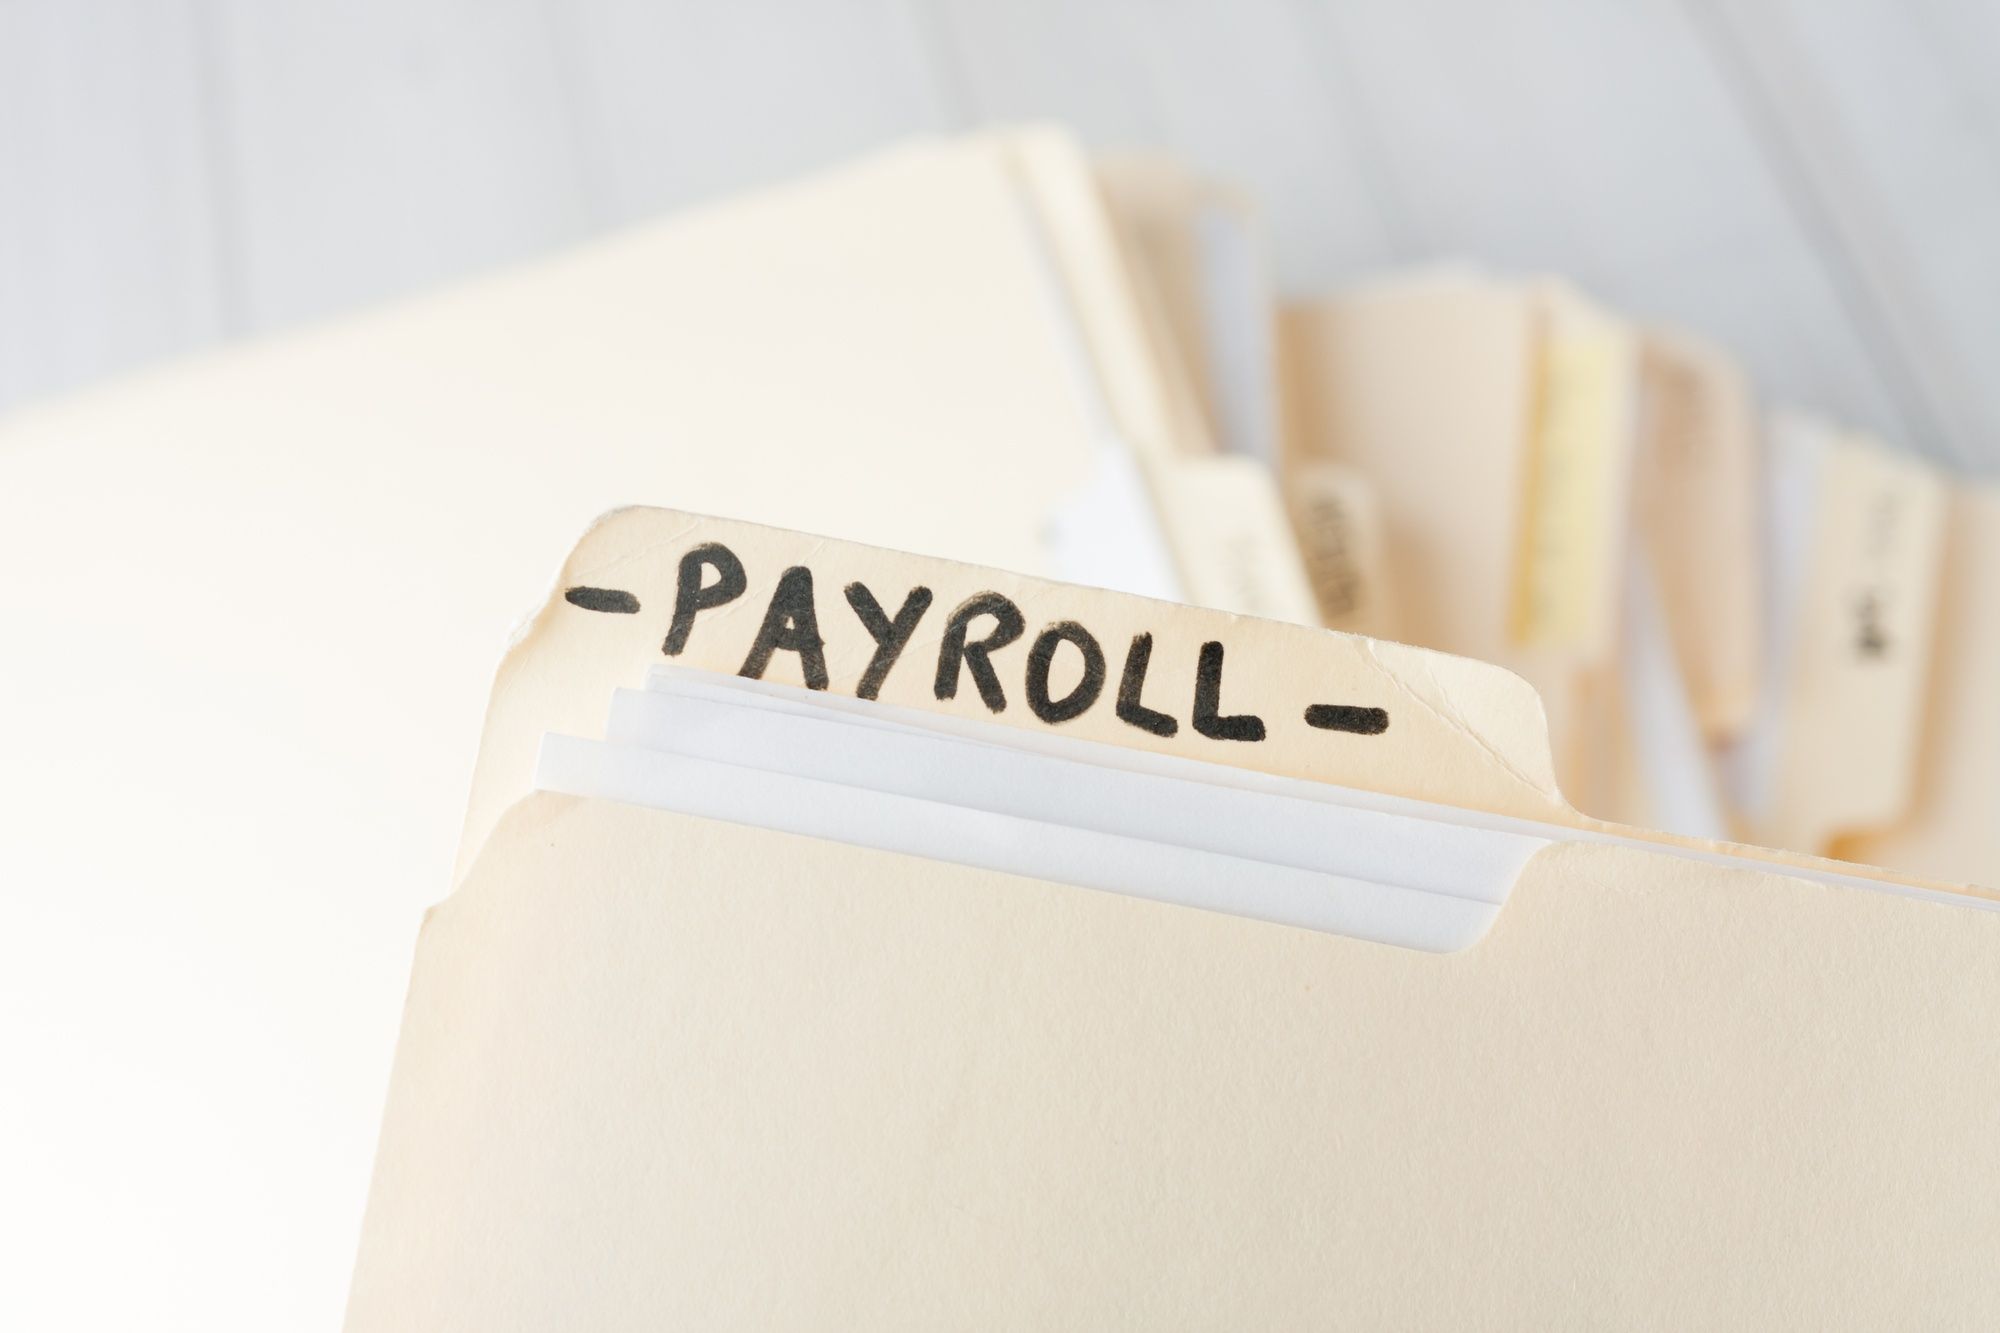 Payroll folders regarding the Supreme Court ruling to not expand the Phoenix pay system class action lawsuit